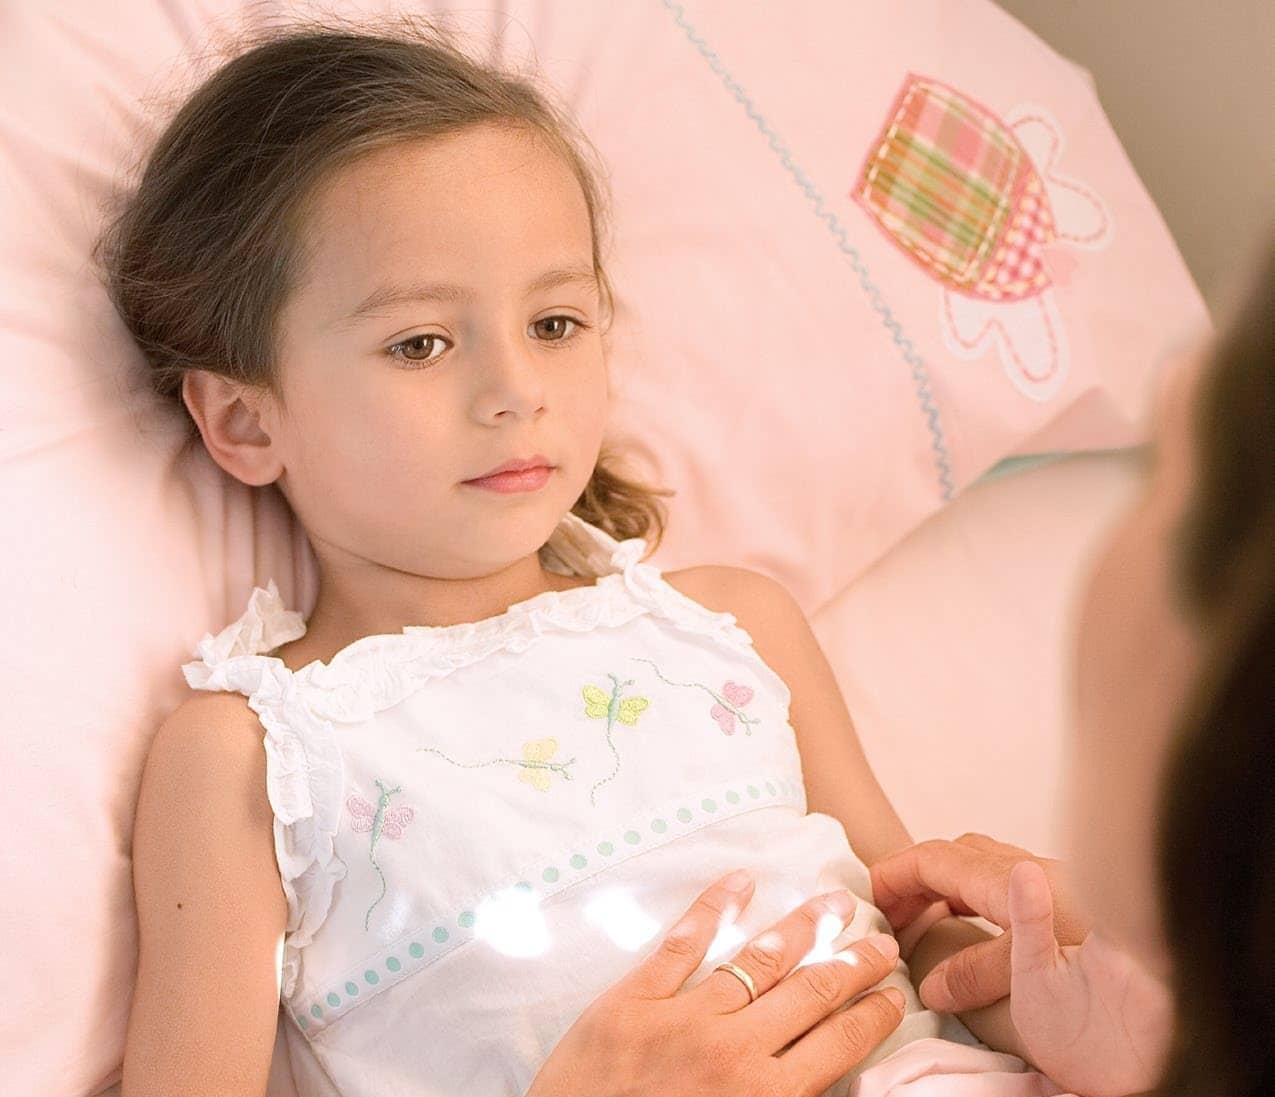 Spotting The Stomach Bug In Your child